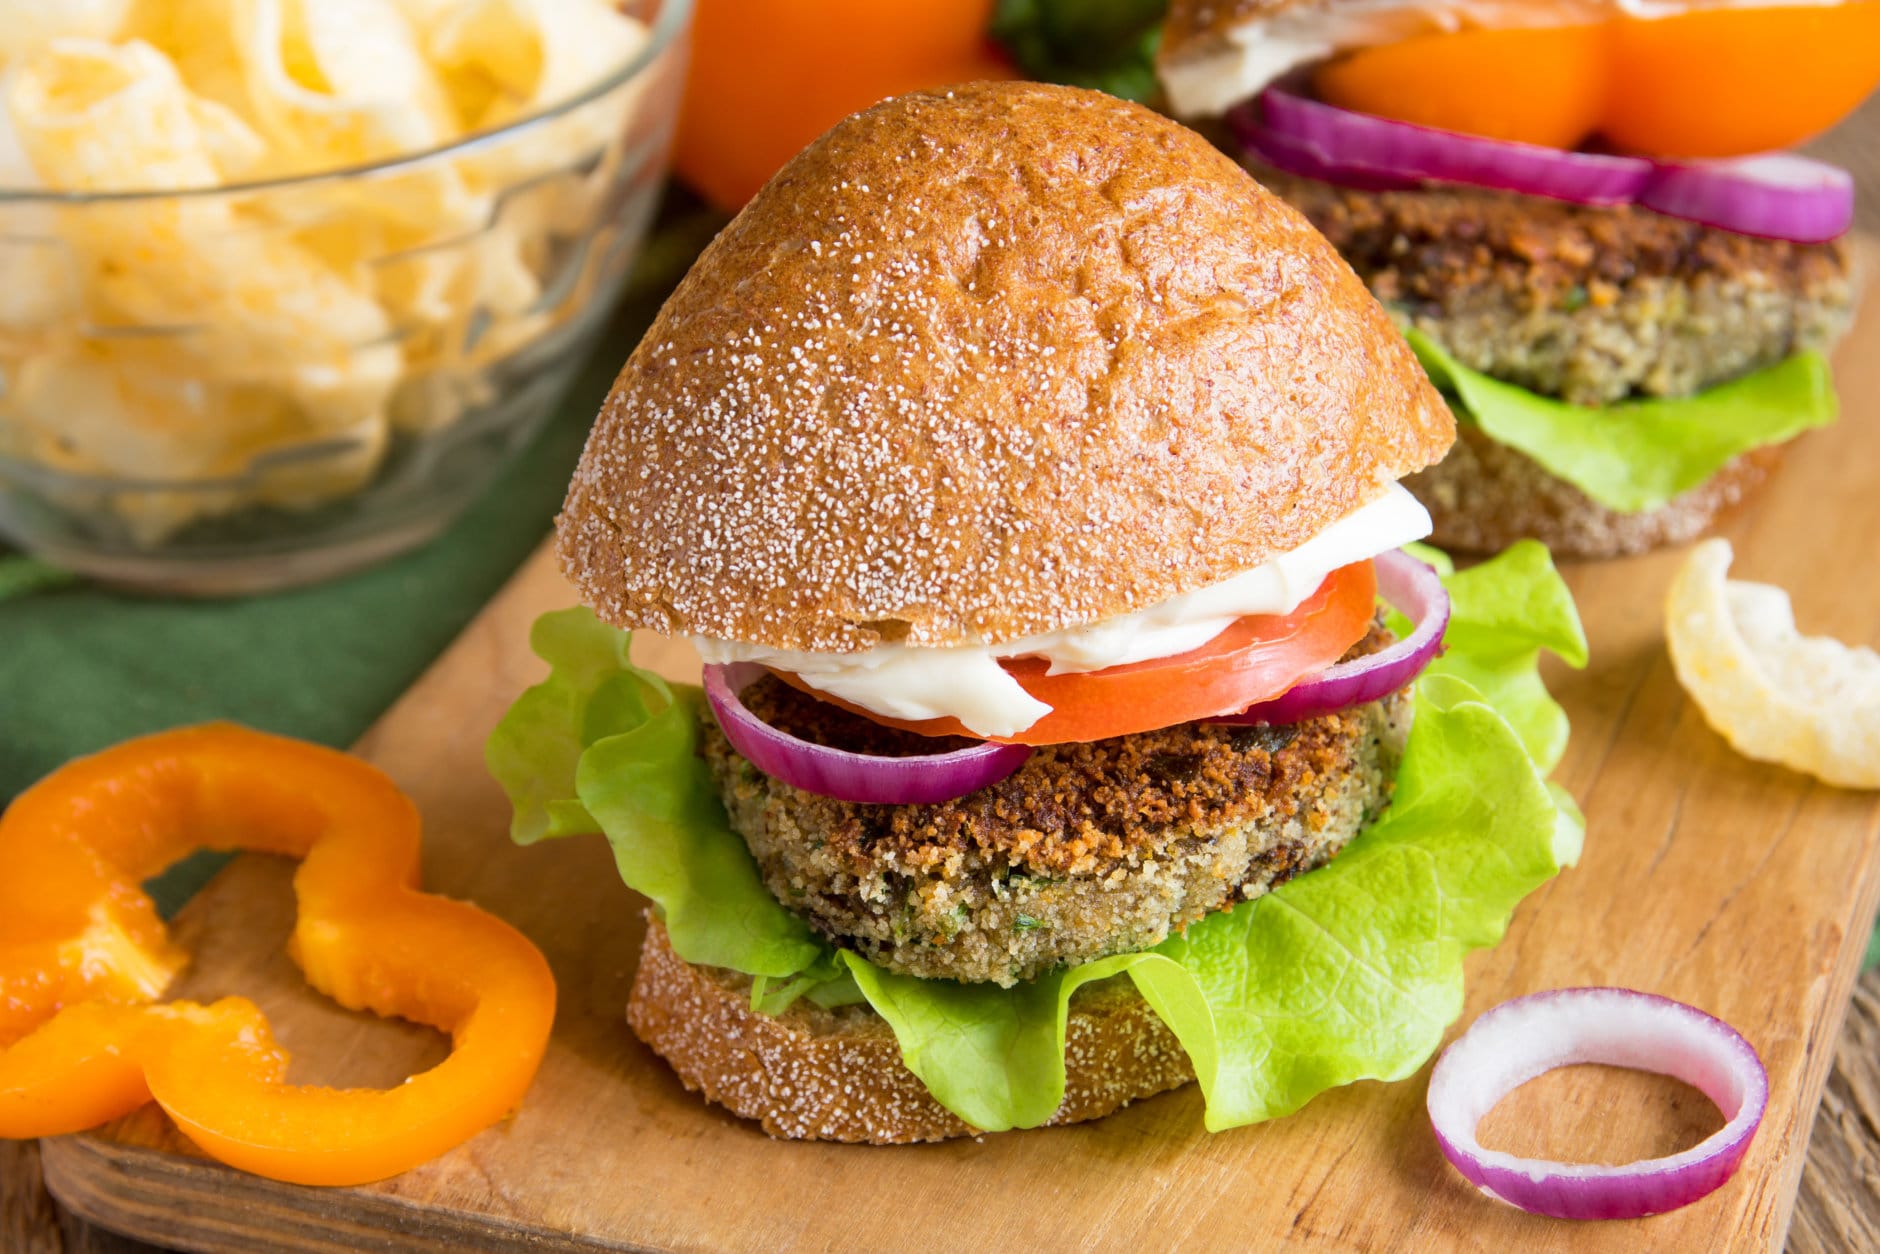 A good source of plant-based protein, lentils can be used not only in soup but homemade burgers. (Getty Images)